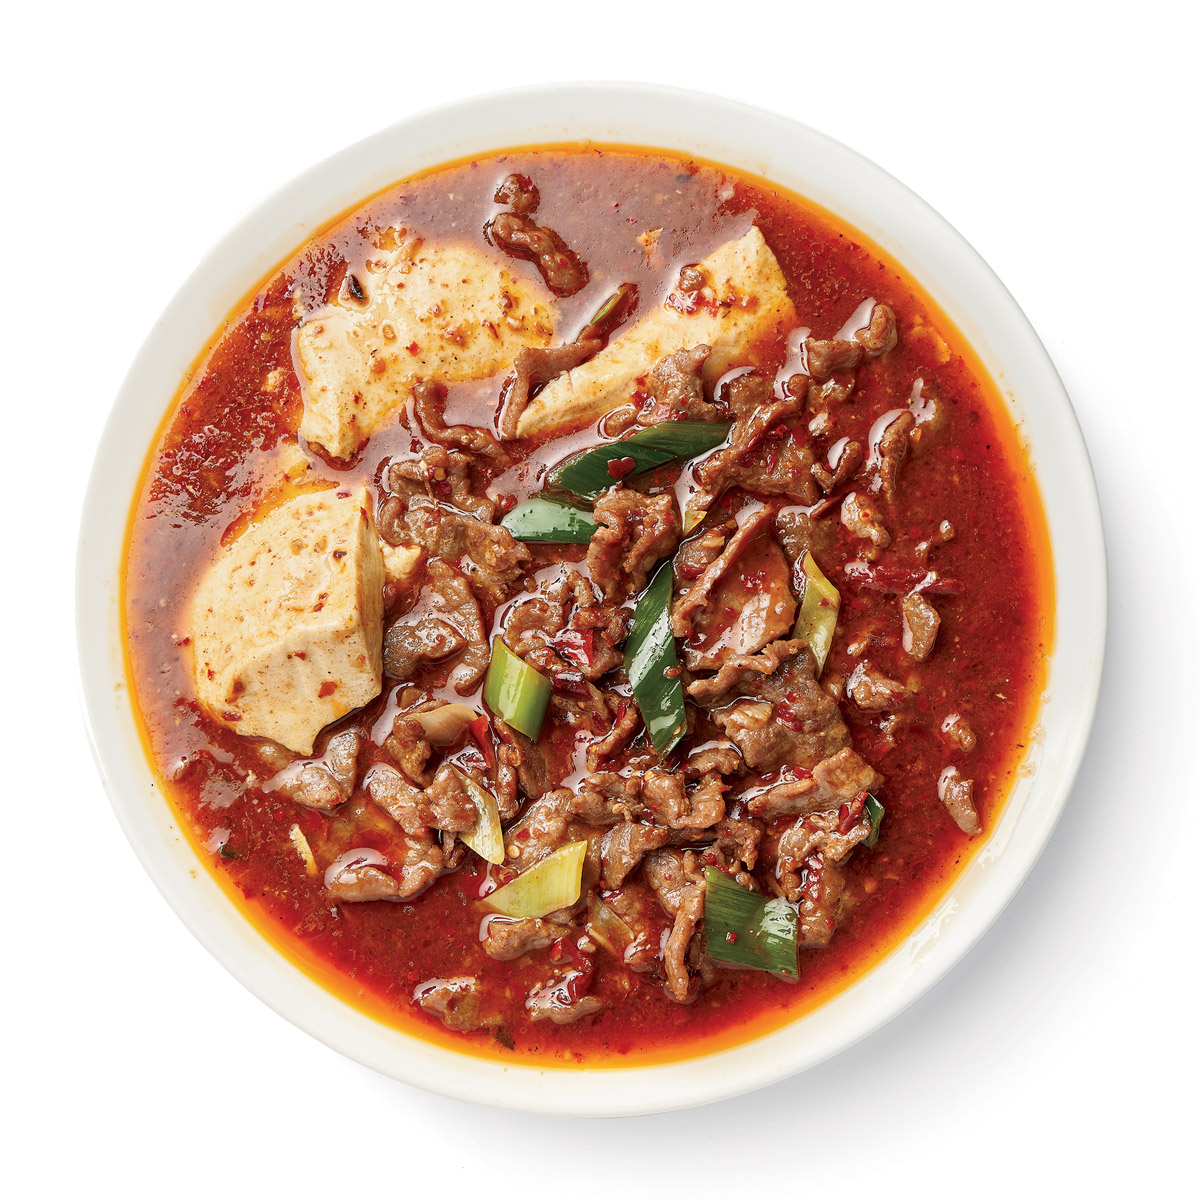 Beef and soft tofu with spicy sauce